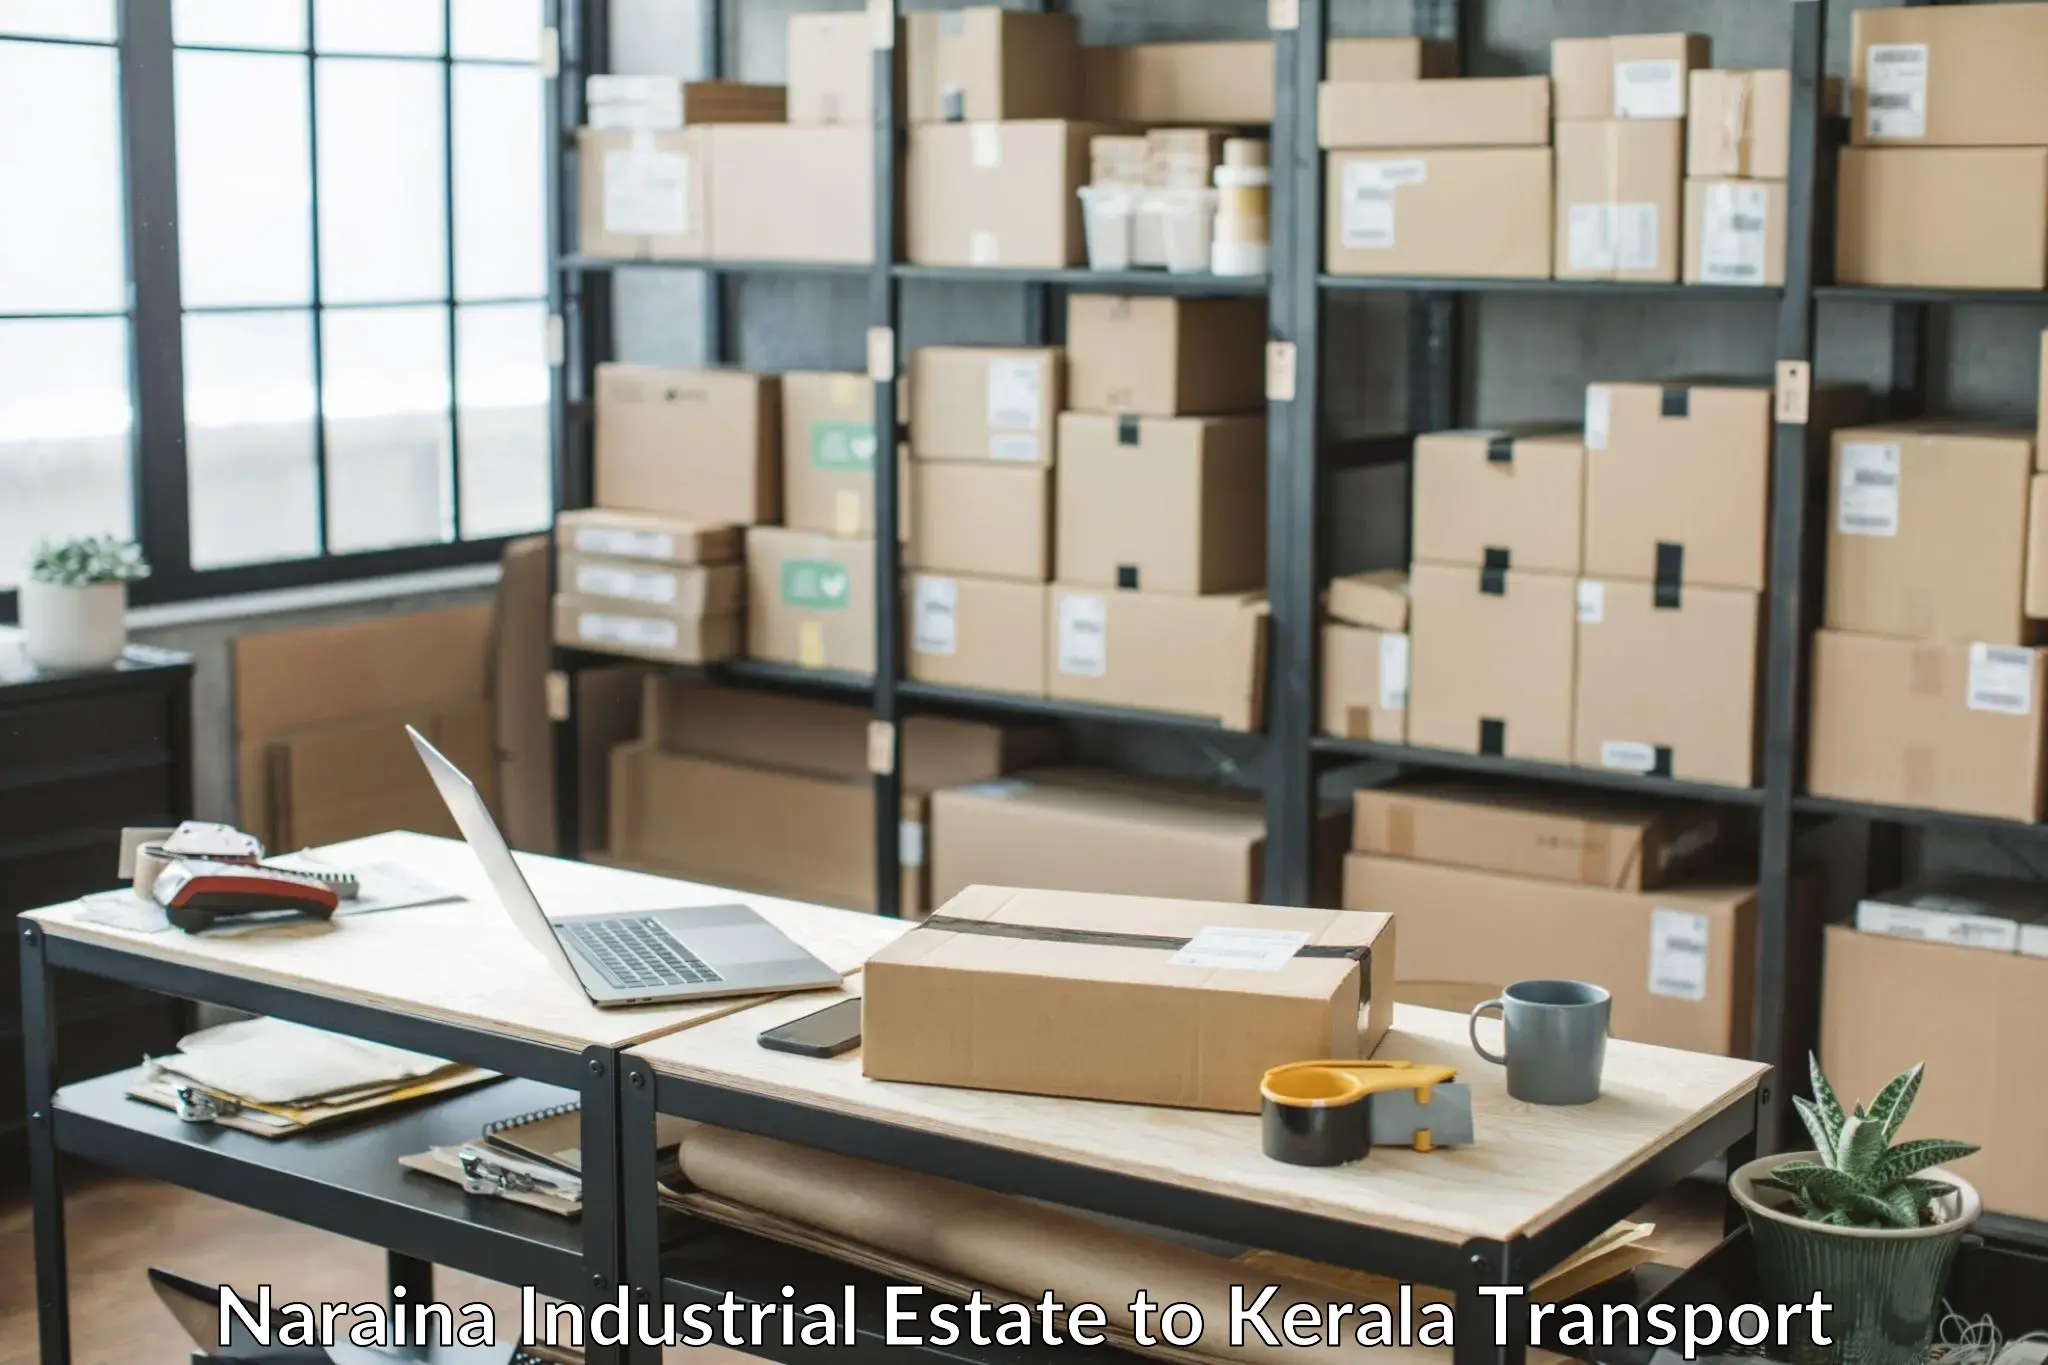 Delivery service Naraina Industrial Estate to Kollam